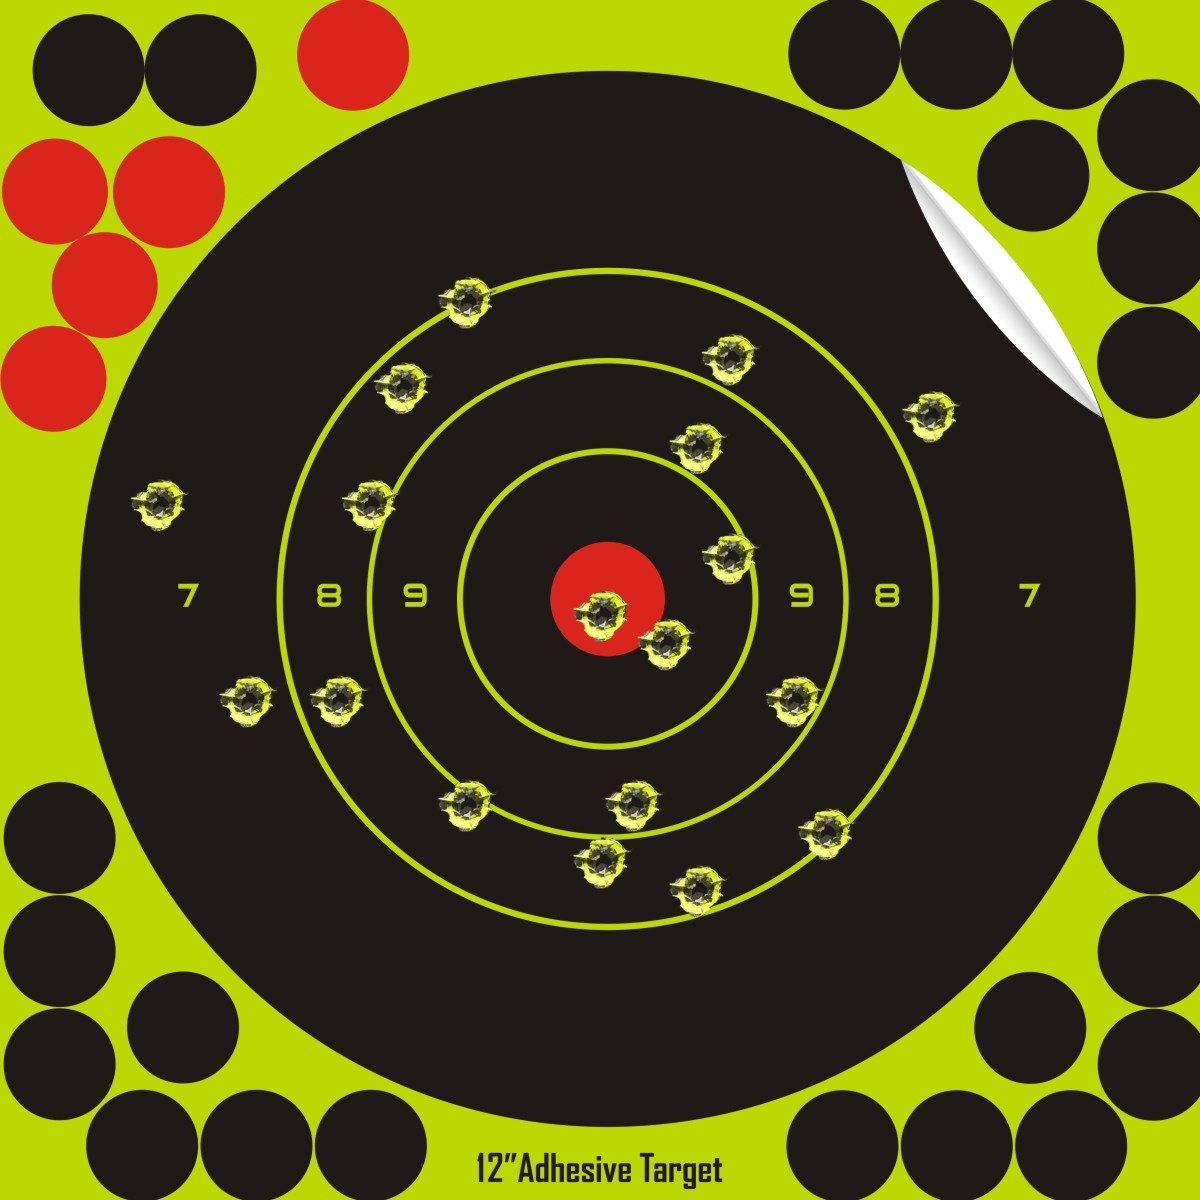 Shooting-Target-Shoot-and-See-Bright-Fluorescent-Yellow.jpg